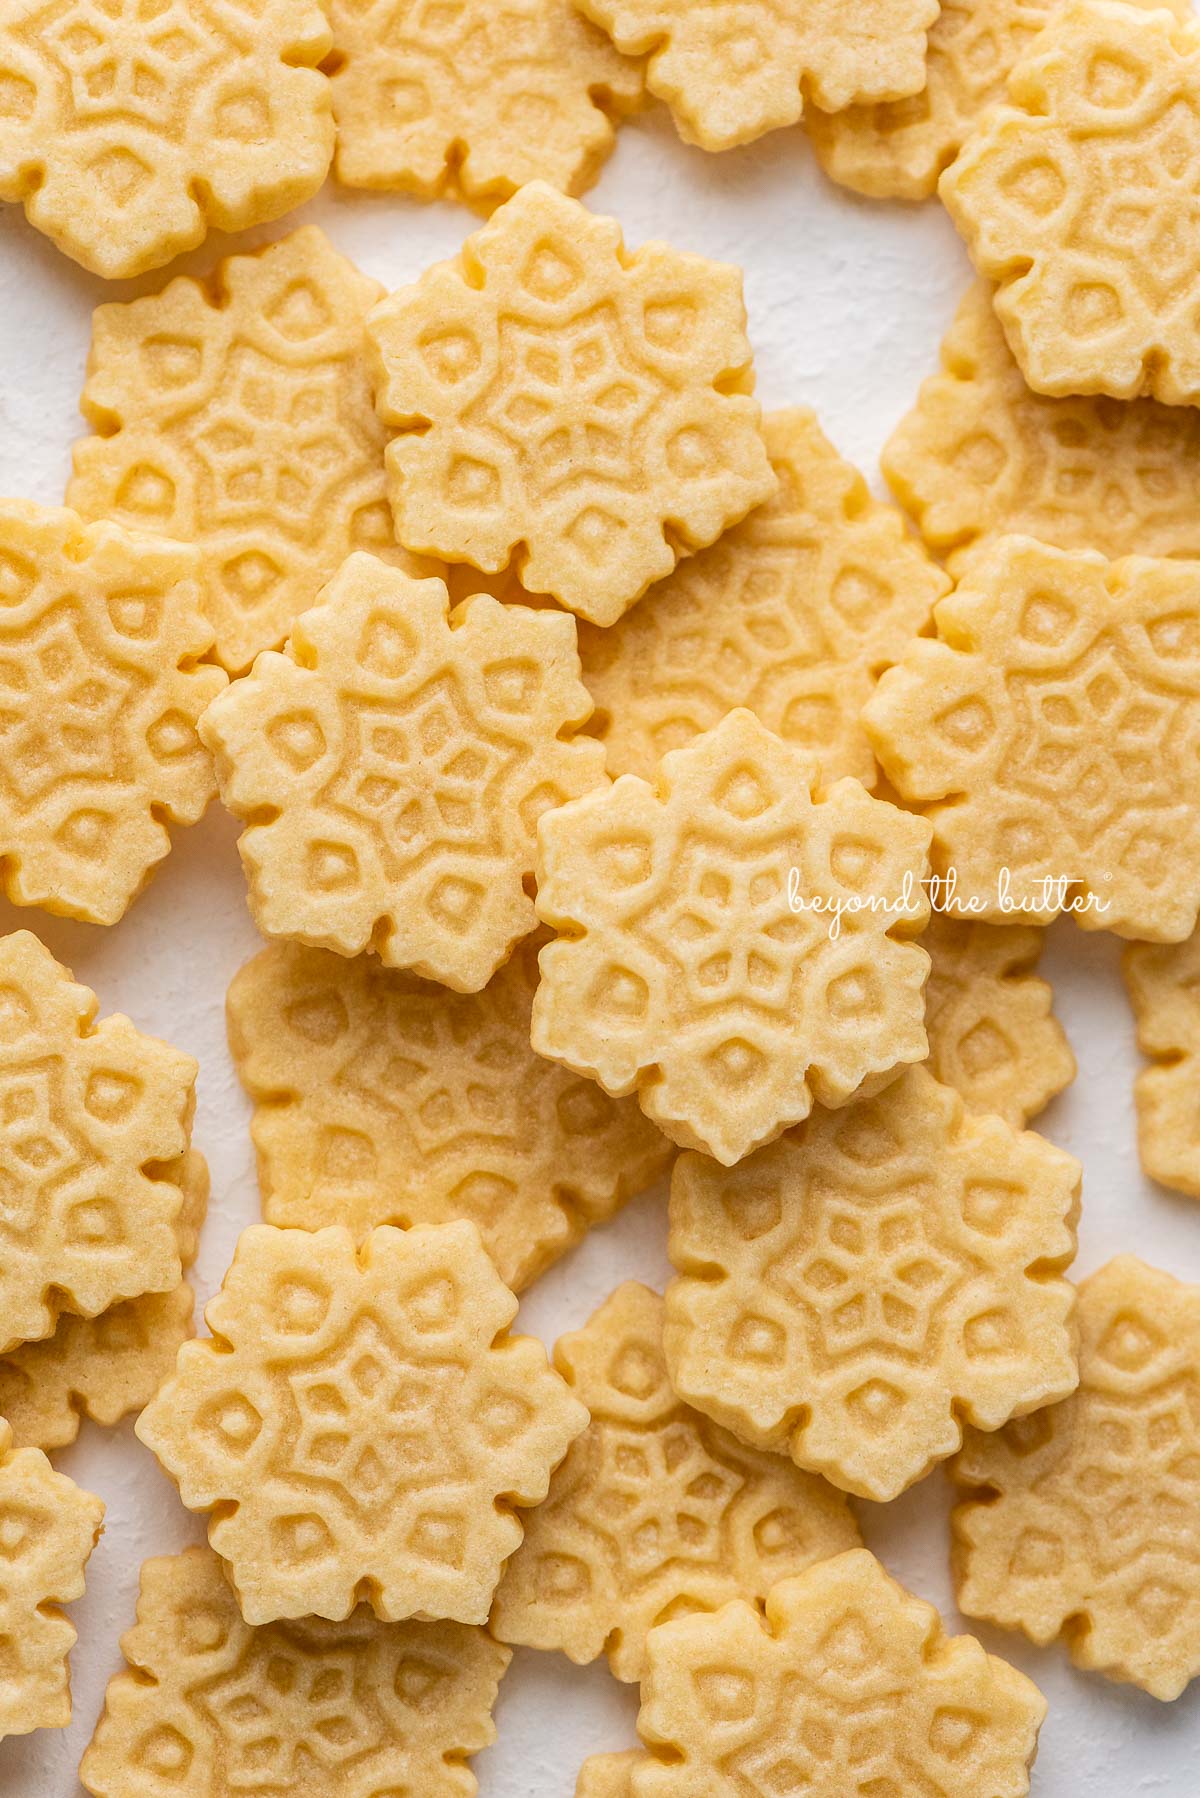 Randomly placed homemade butter cookies on a white background | © Beyond the Butter®